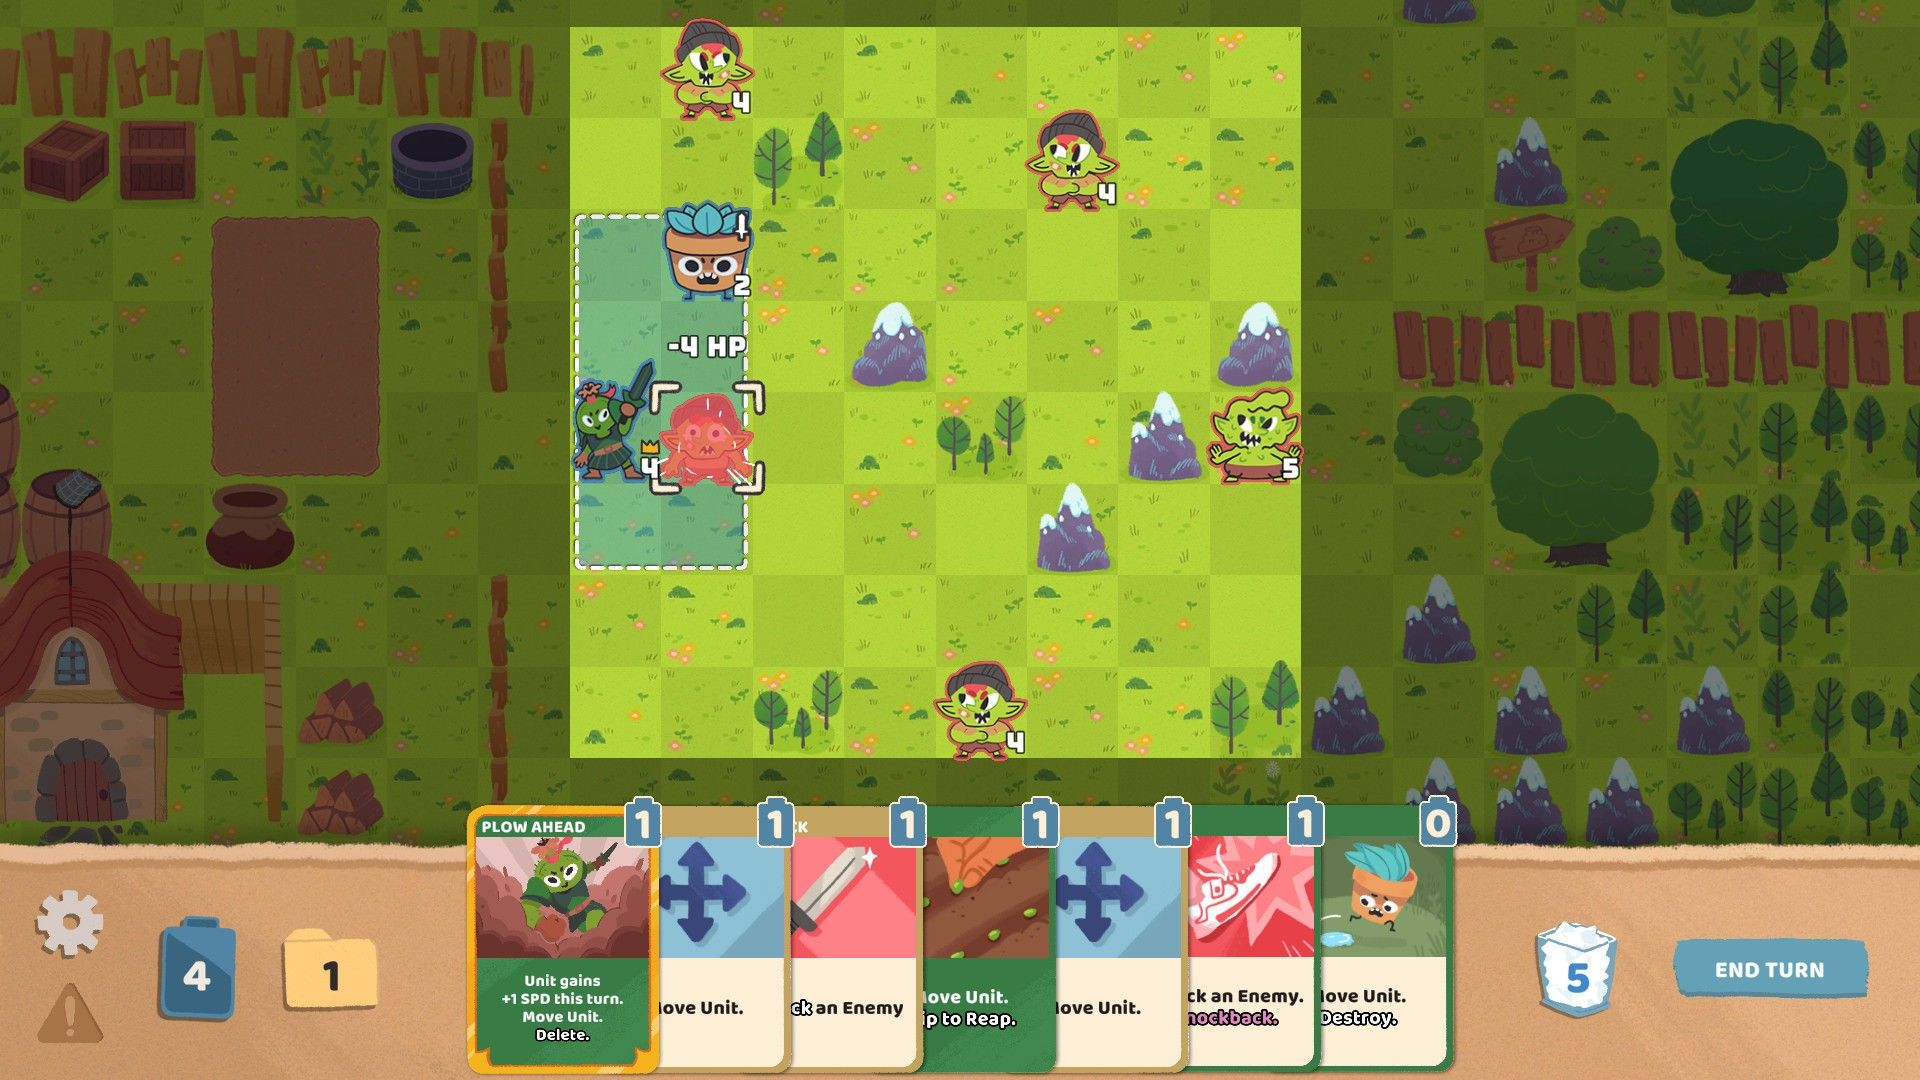 Why Floppy Knights Will Appeal to Fans of Strategy DeckBuilding Games